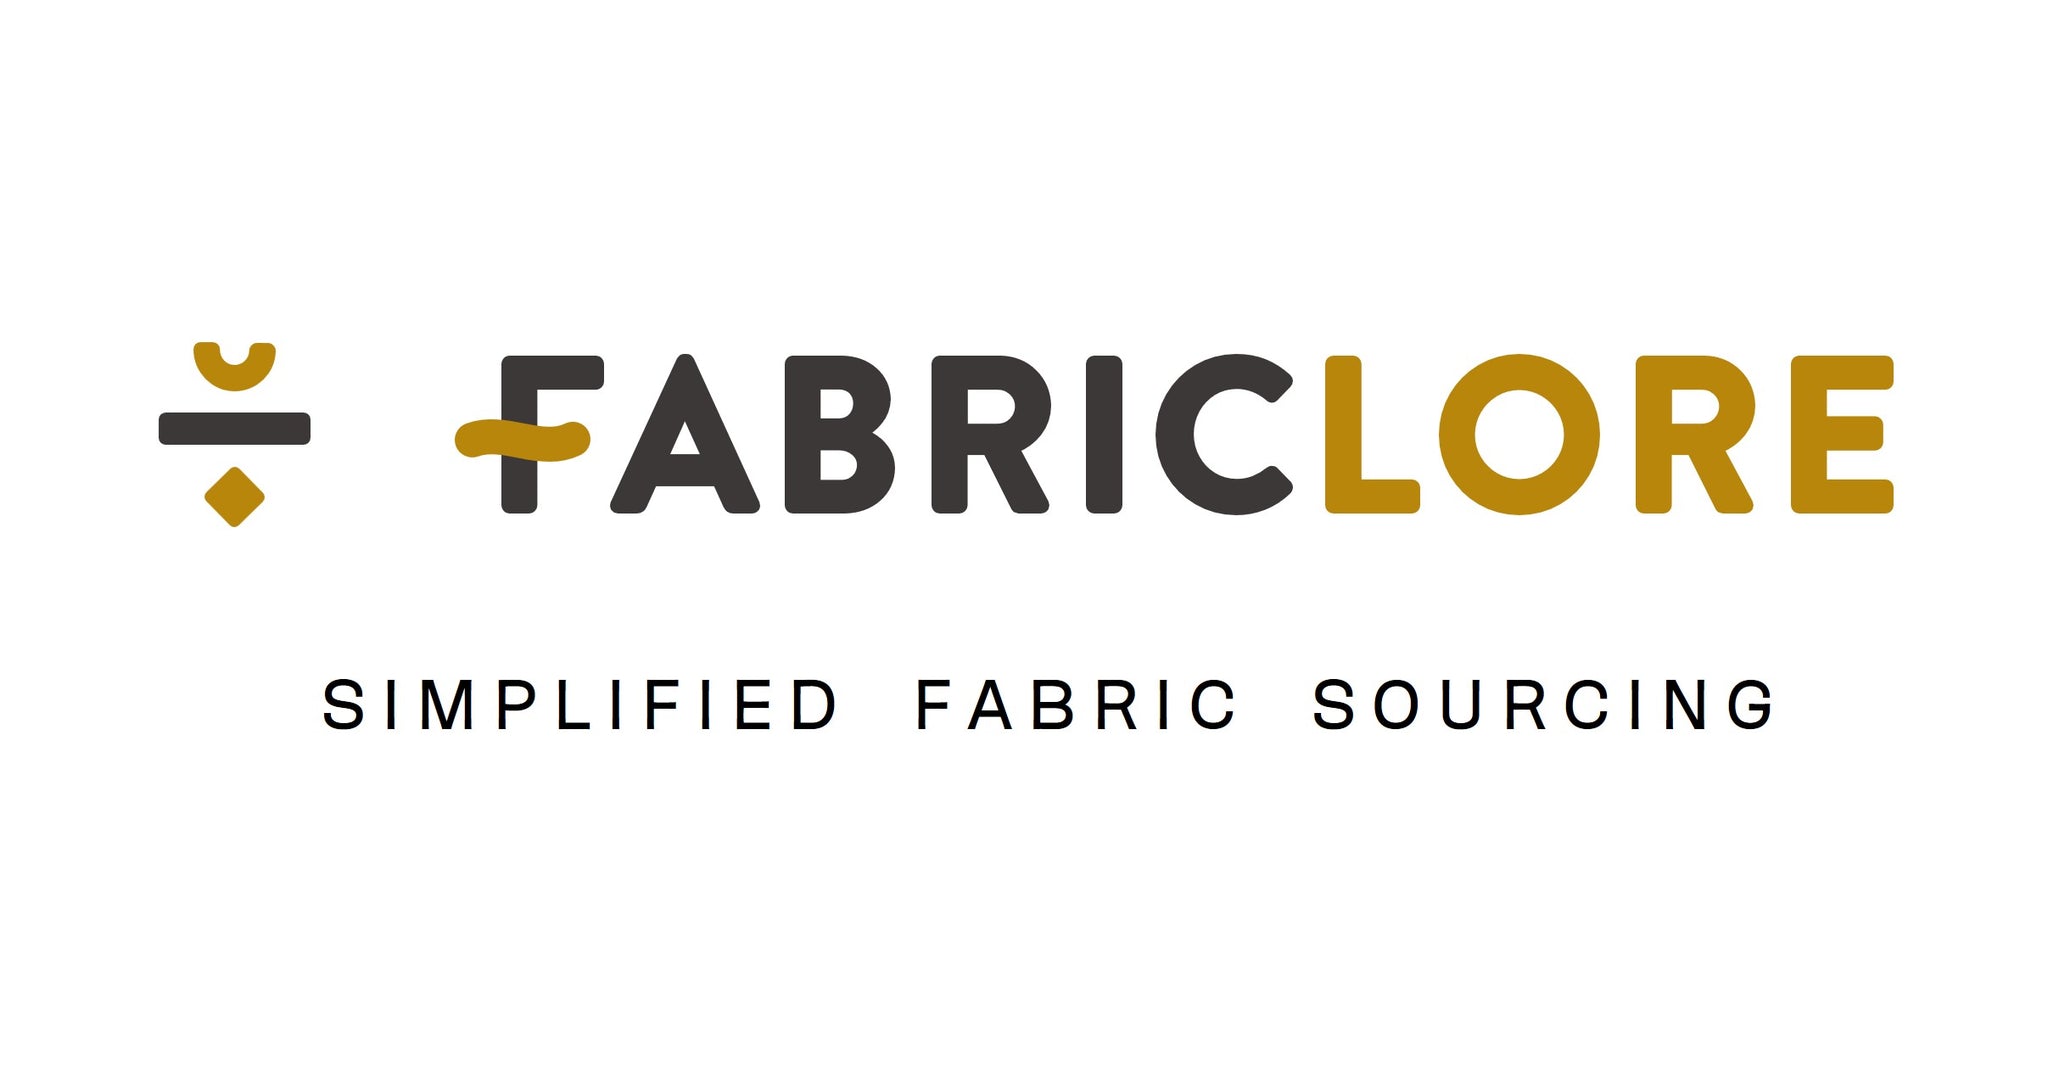 Leading Wholesale Fabric Supplier in Middle East